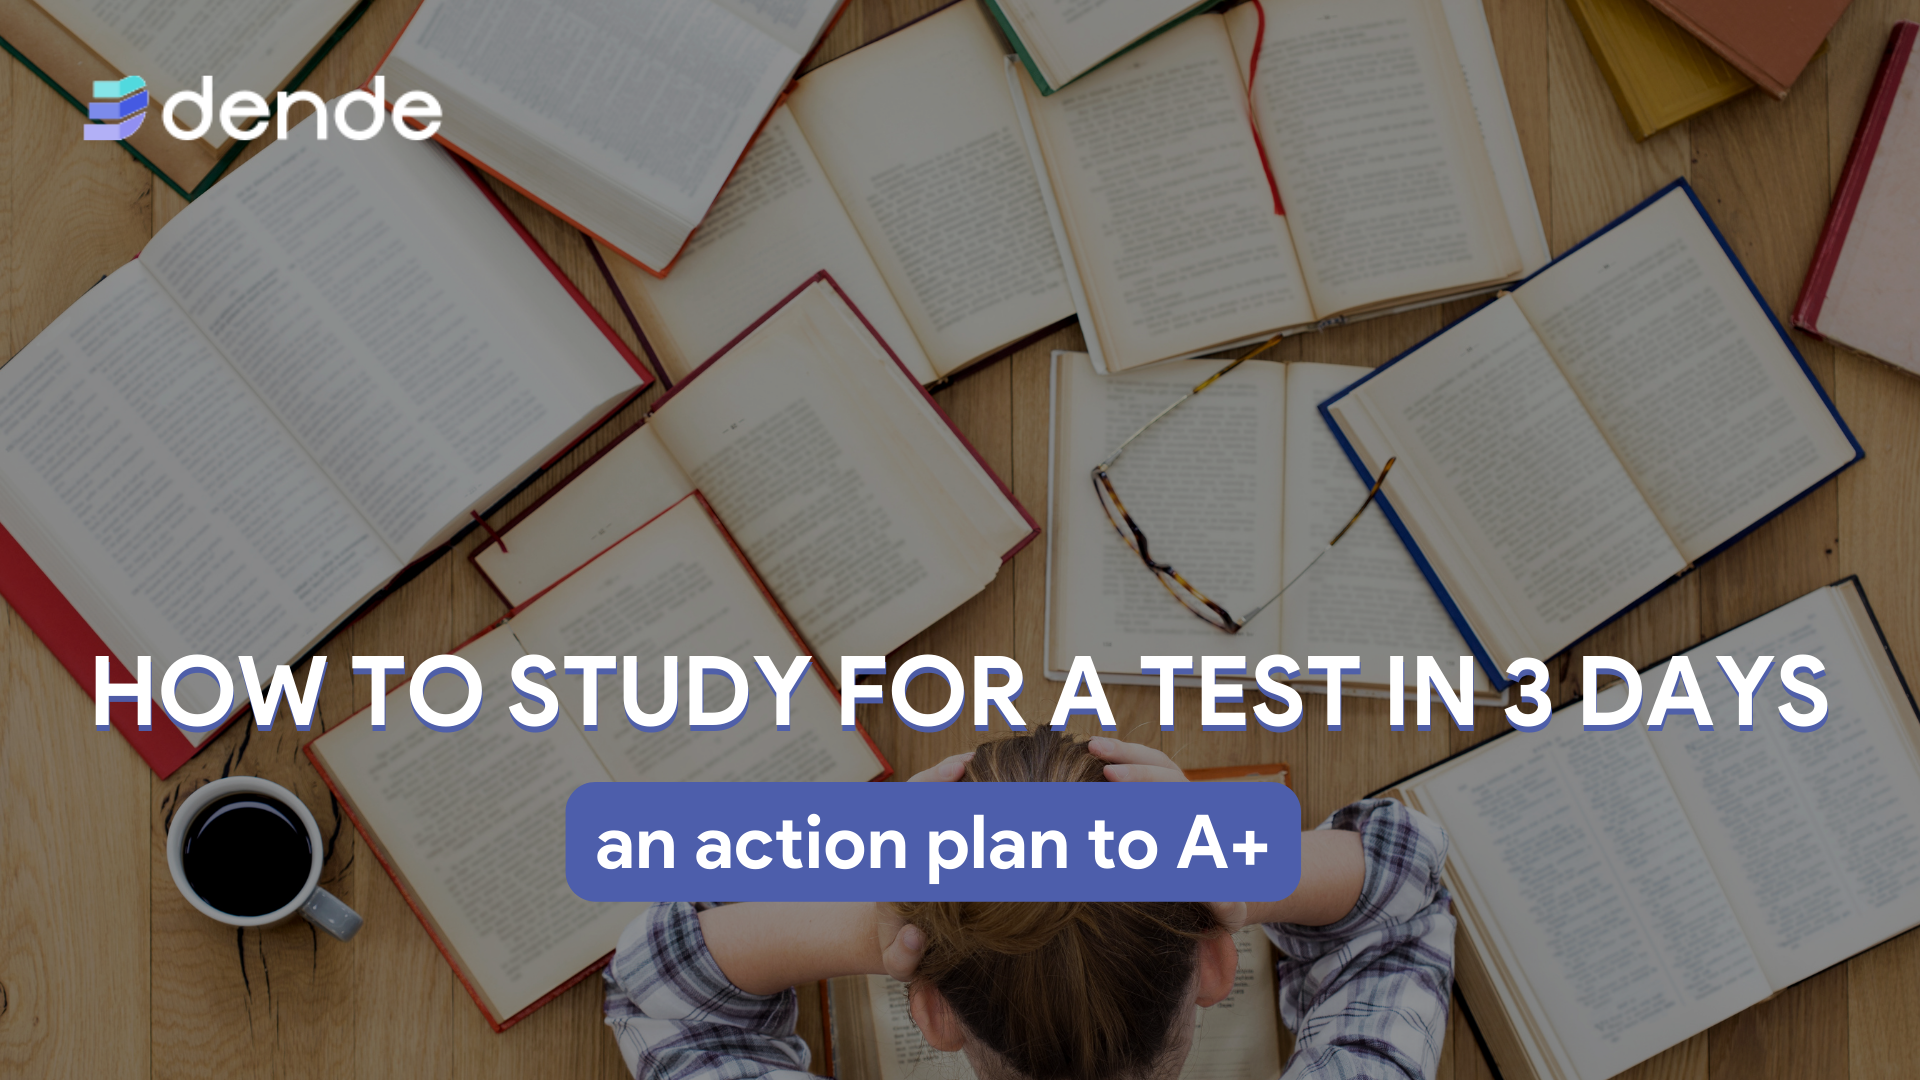 How to study efficiently for a test in 3 days (an action plan to A+)